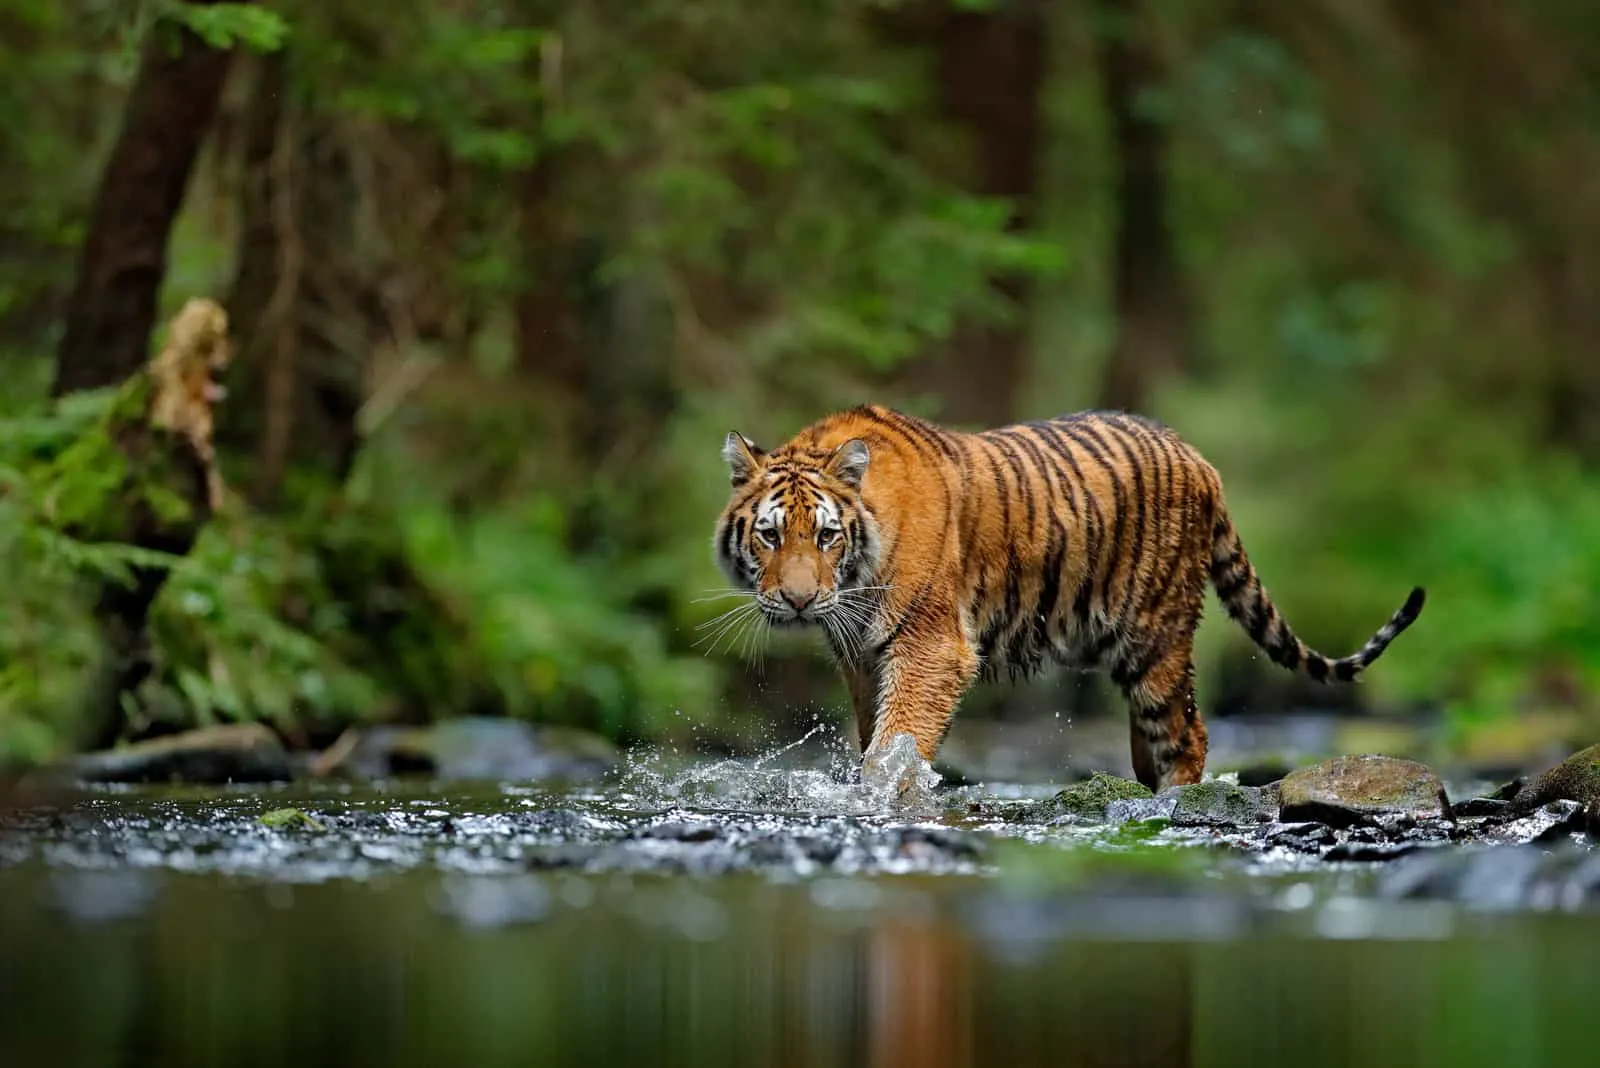 Tiger in nature